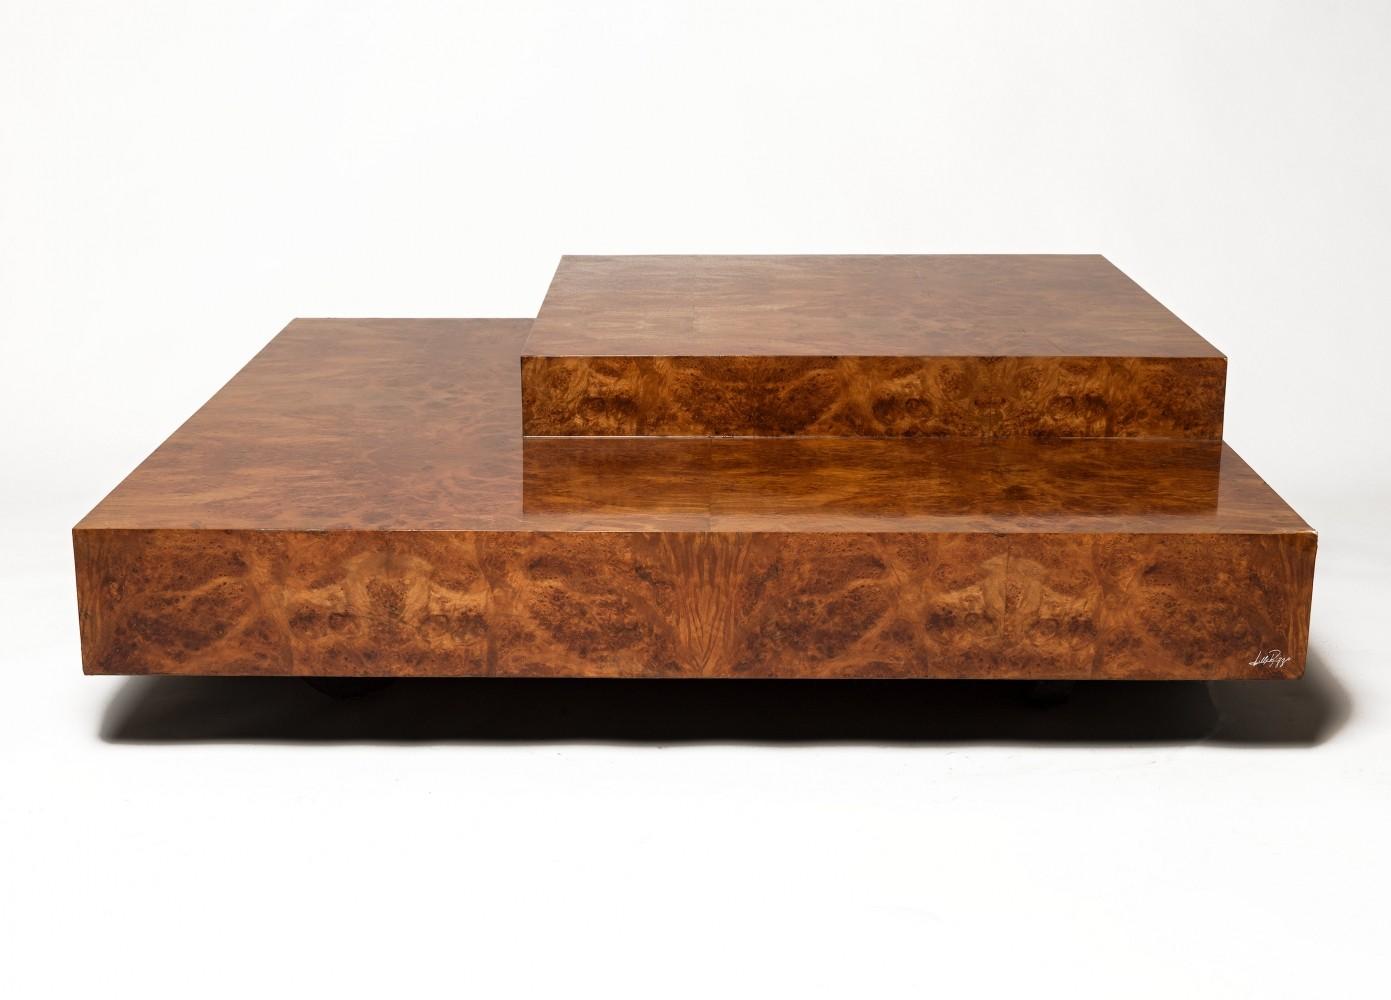 Table basse carrée Willy Rizzo vert menthe clair, années 1970 en vente 2